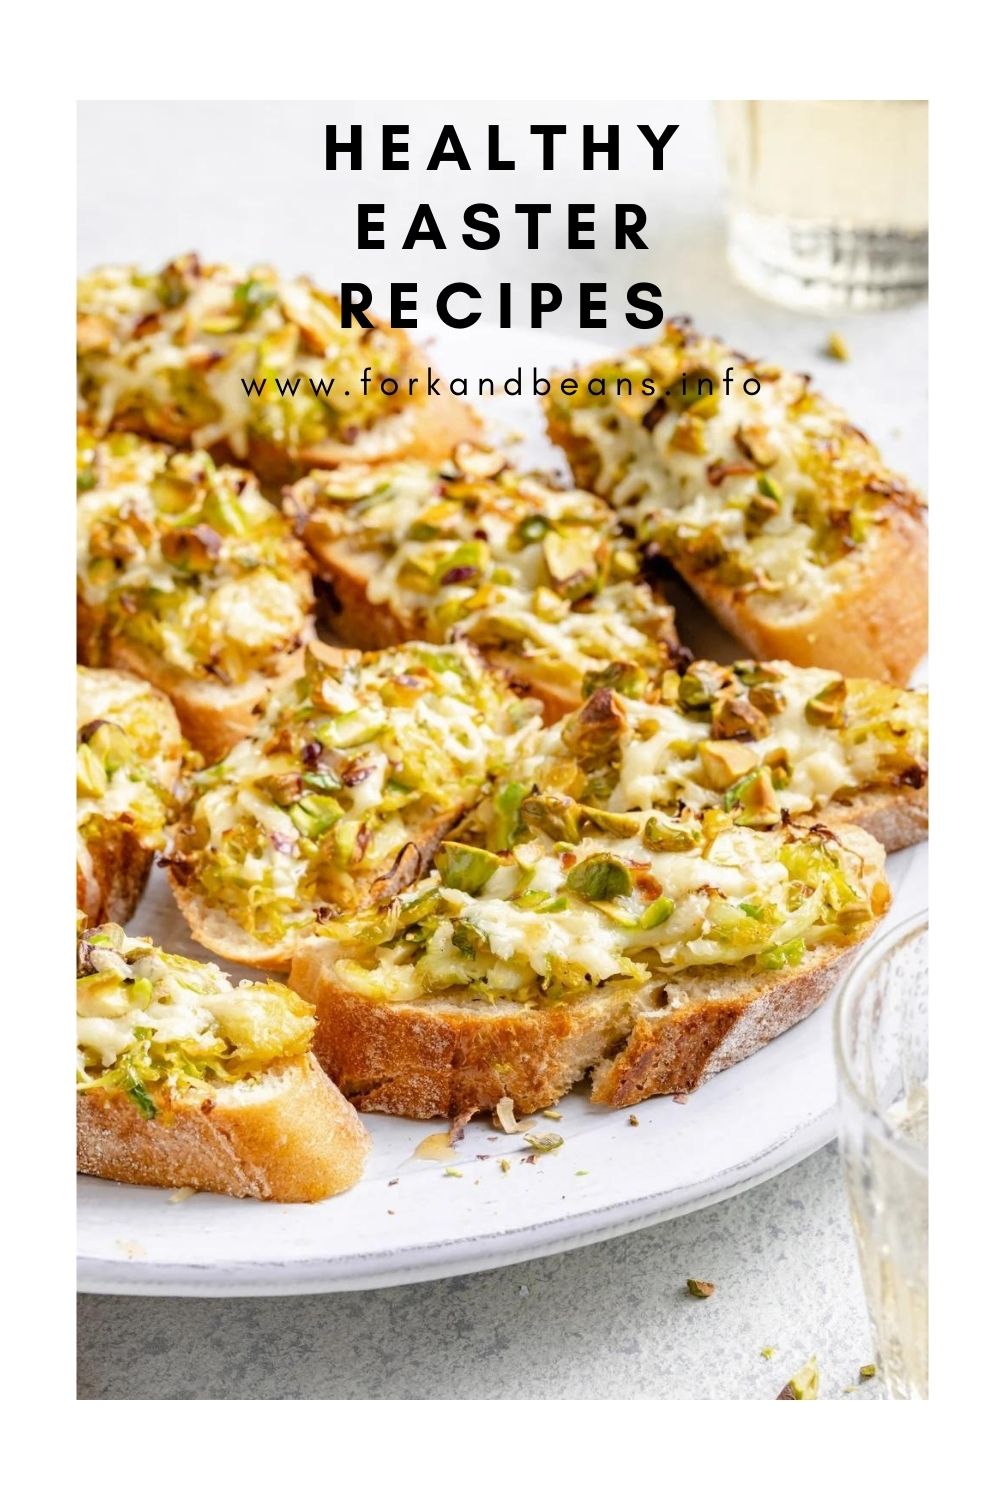 White Cheddar Brussels Sprouts & Pistachio Crostini with Hot Honey